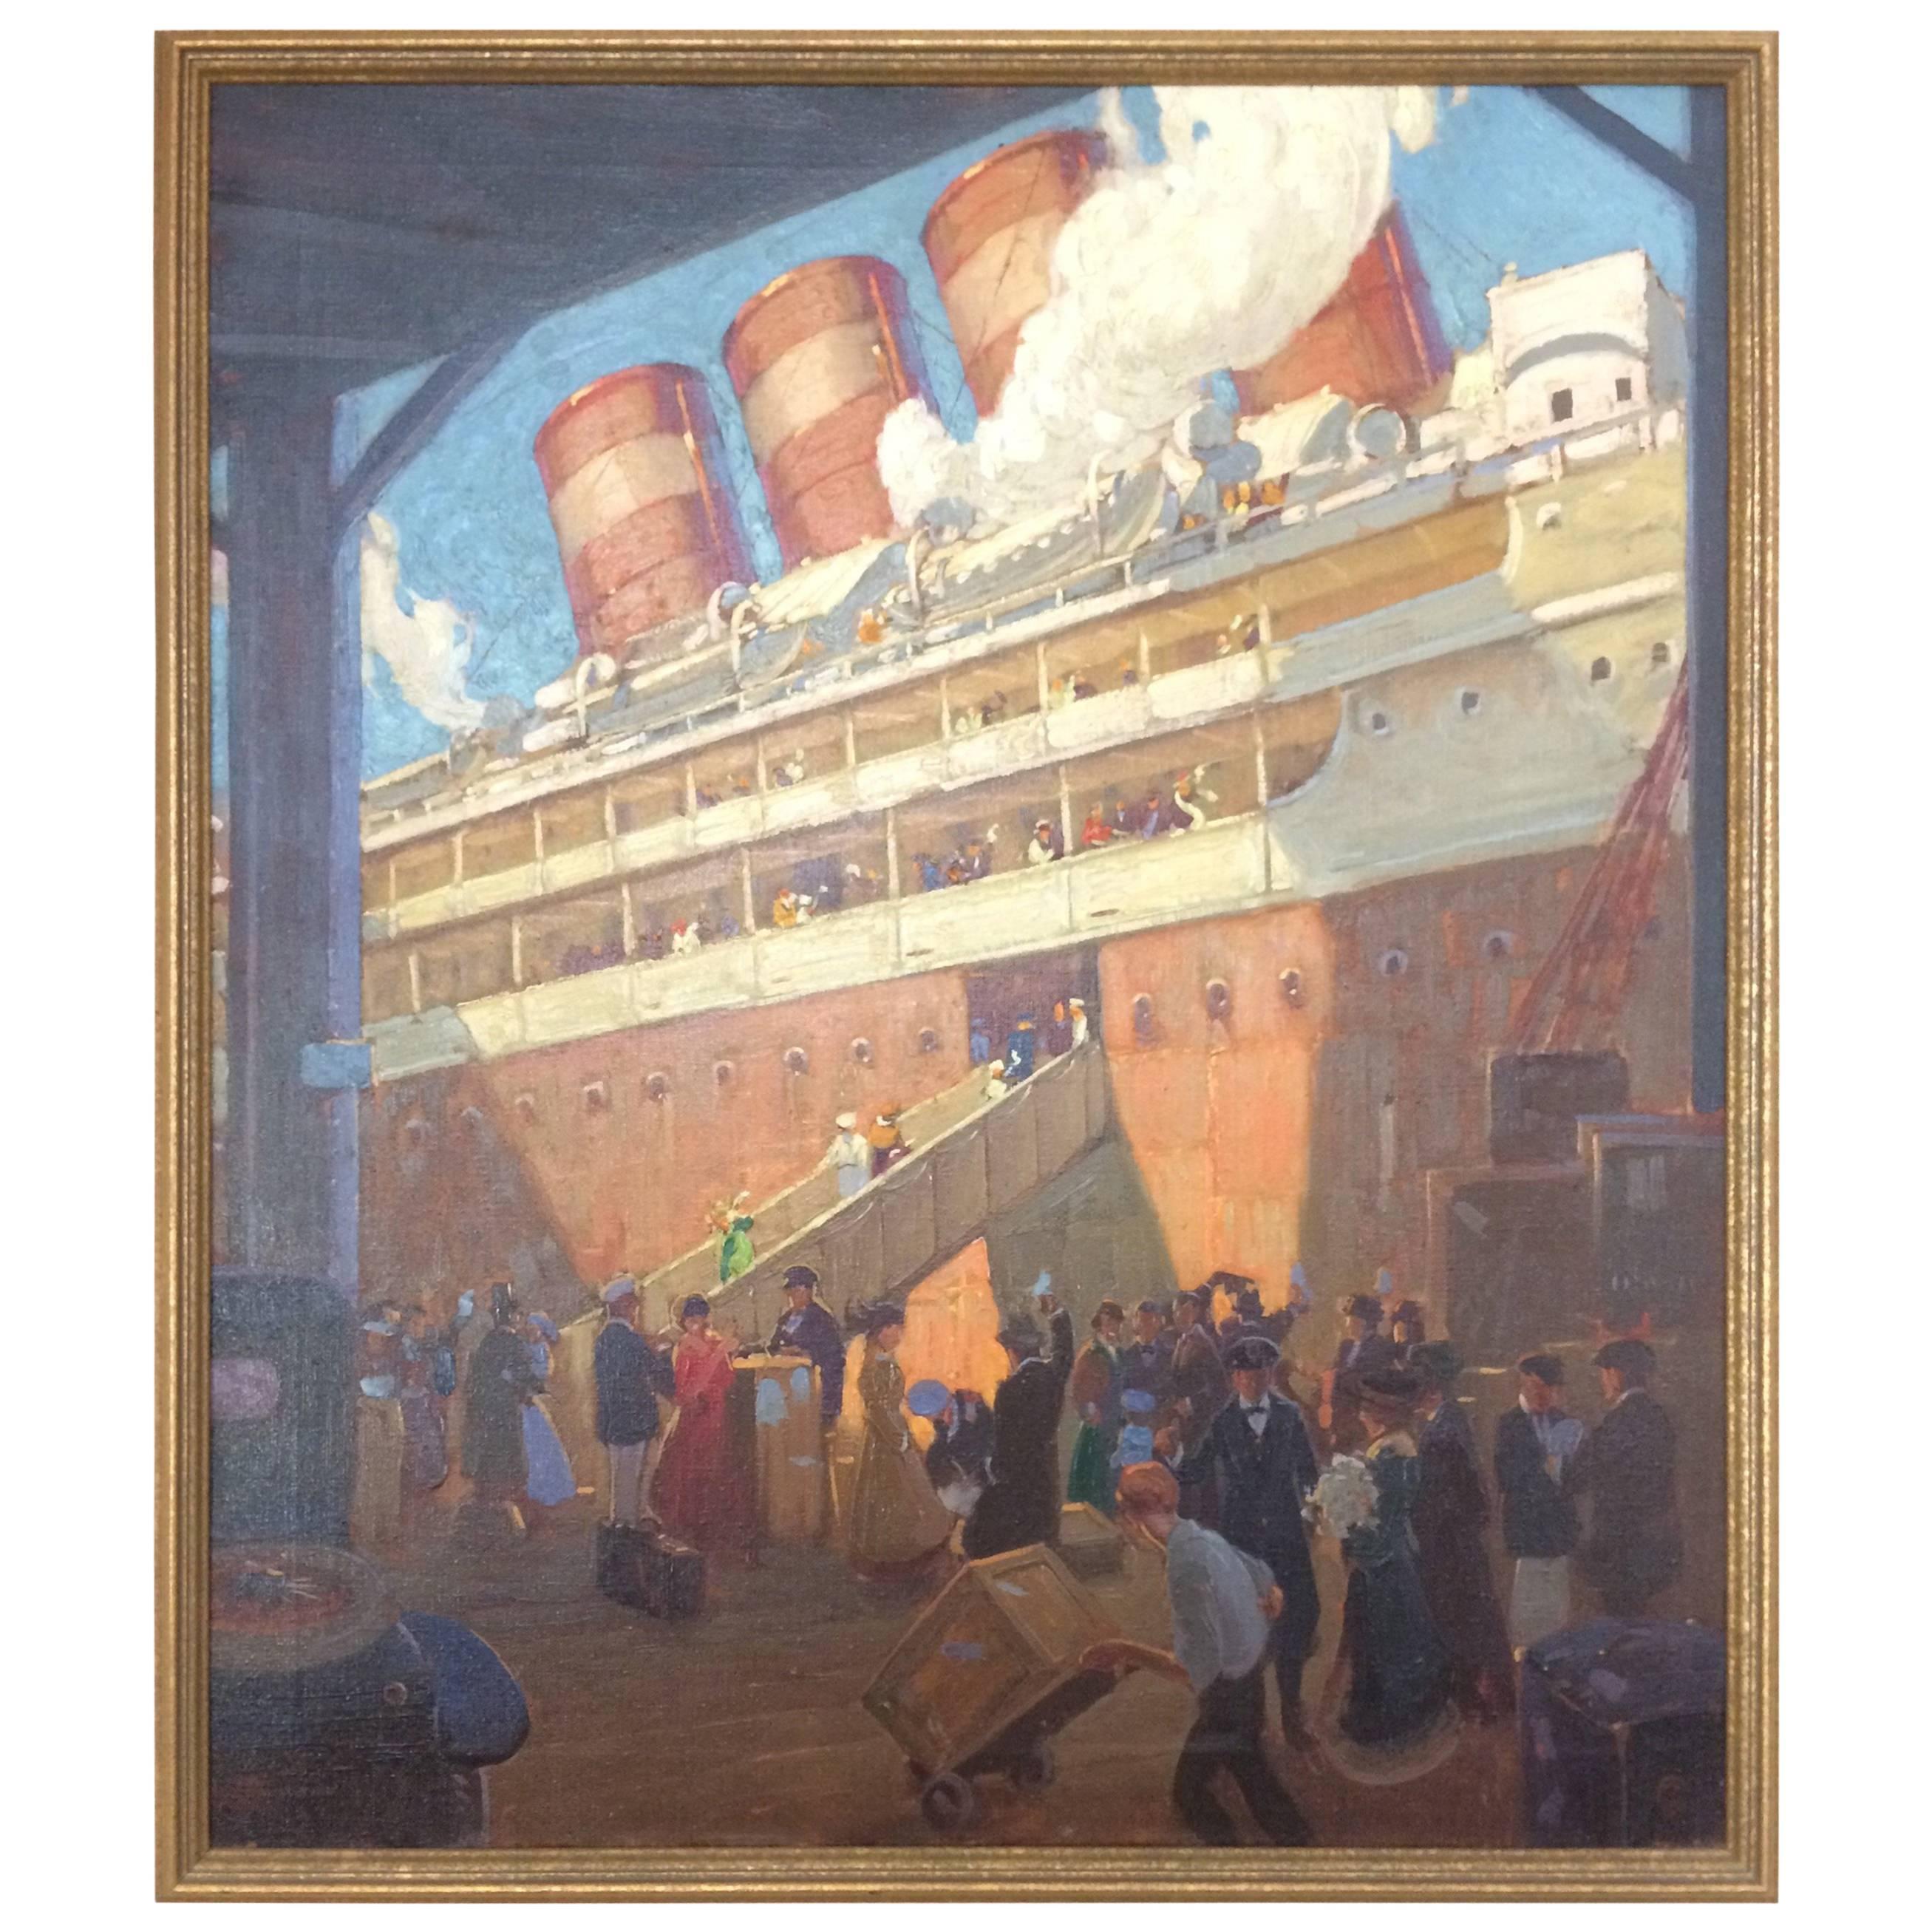 Magical Oil Painting of a Steamship